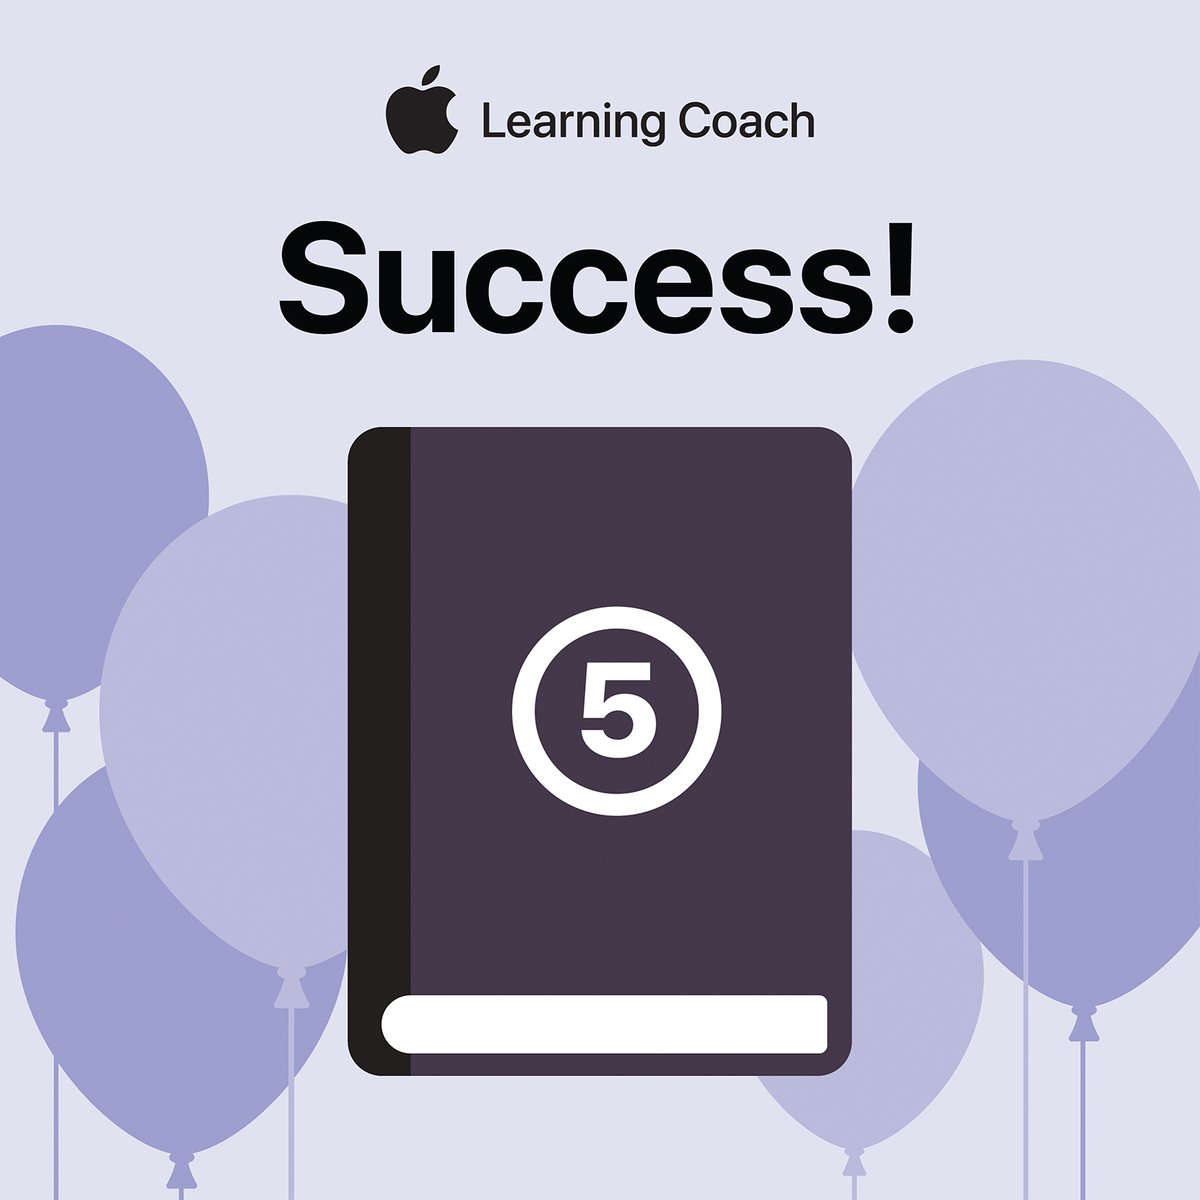 So close! I just finished Unit 5 of Apple Learning Coach! Now, I know how I can add purpose, parameters and priorities to my coaching! @AppleEDU #AppleLearningCoach #techtwitter #edtech